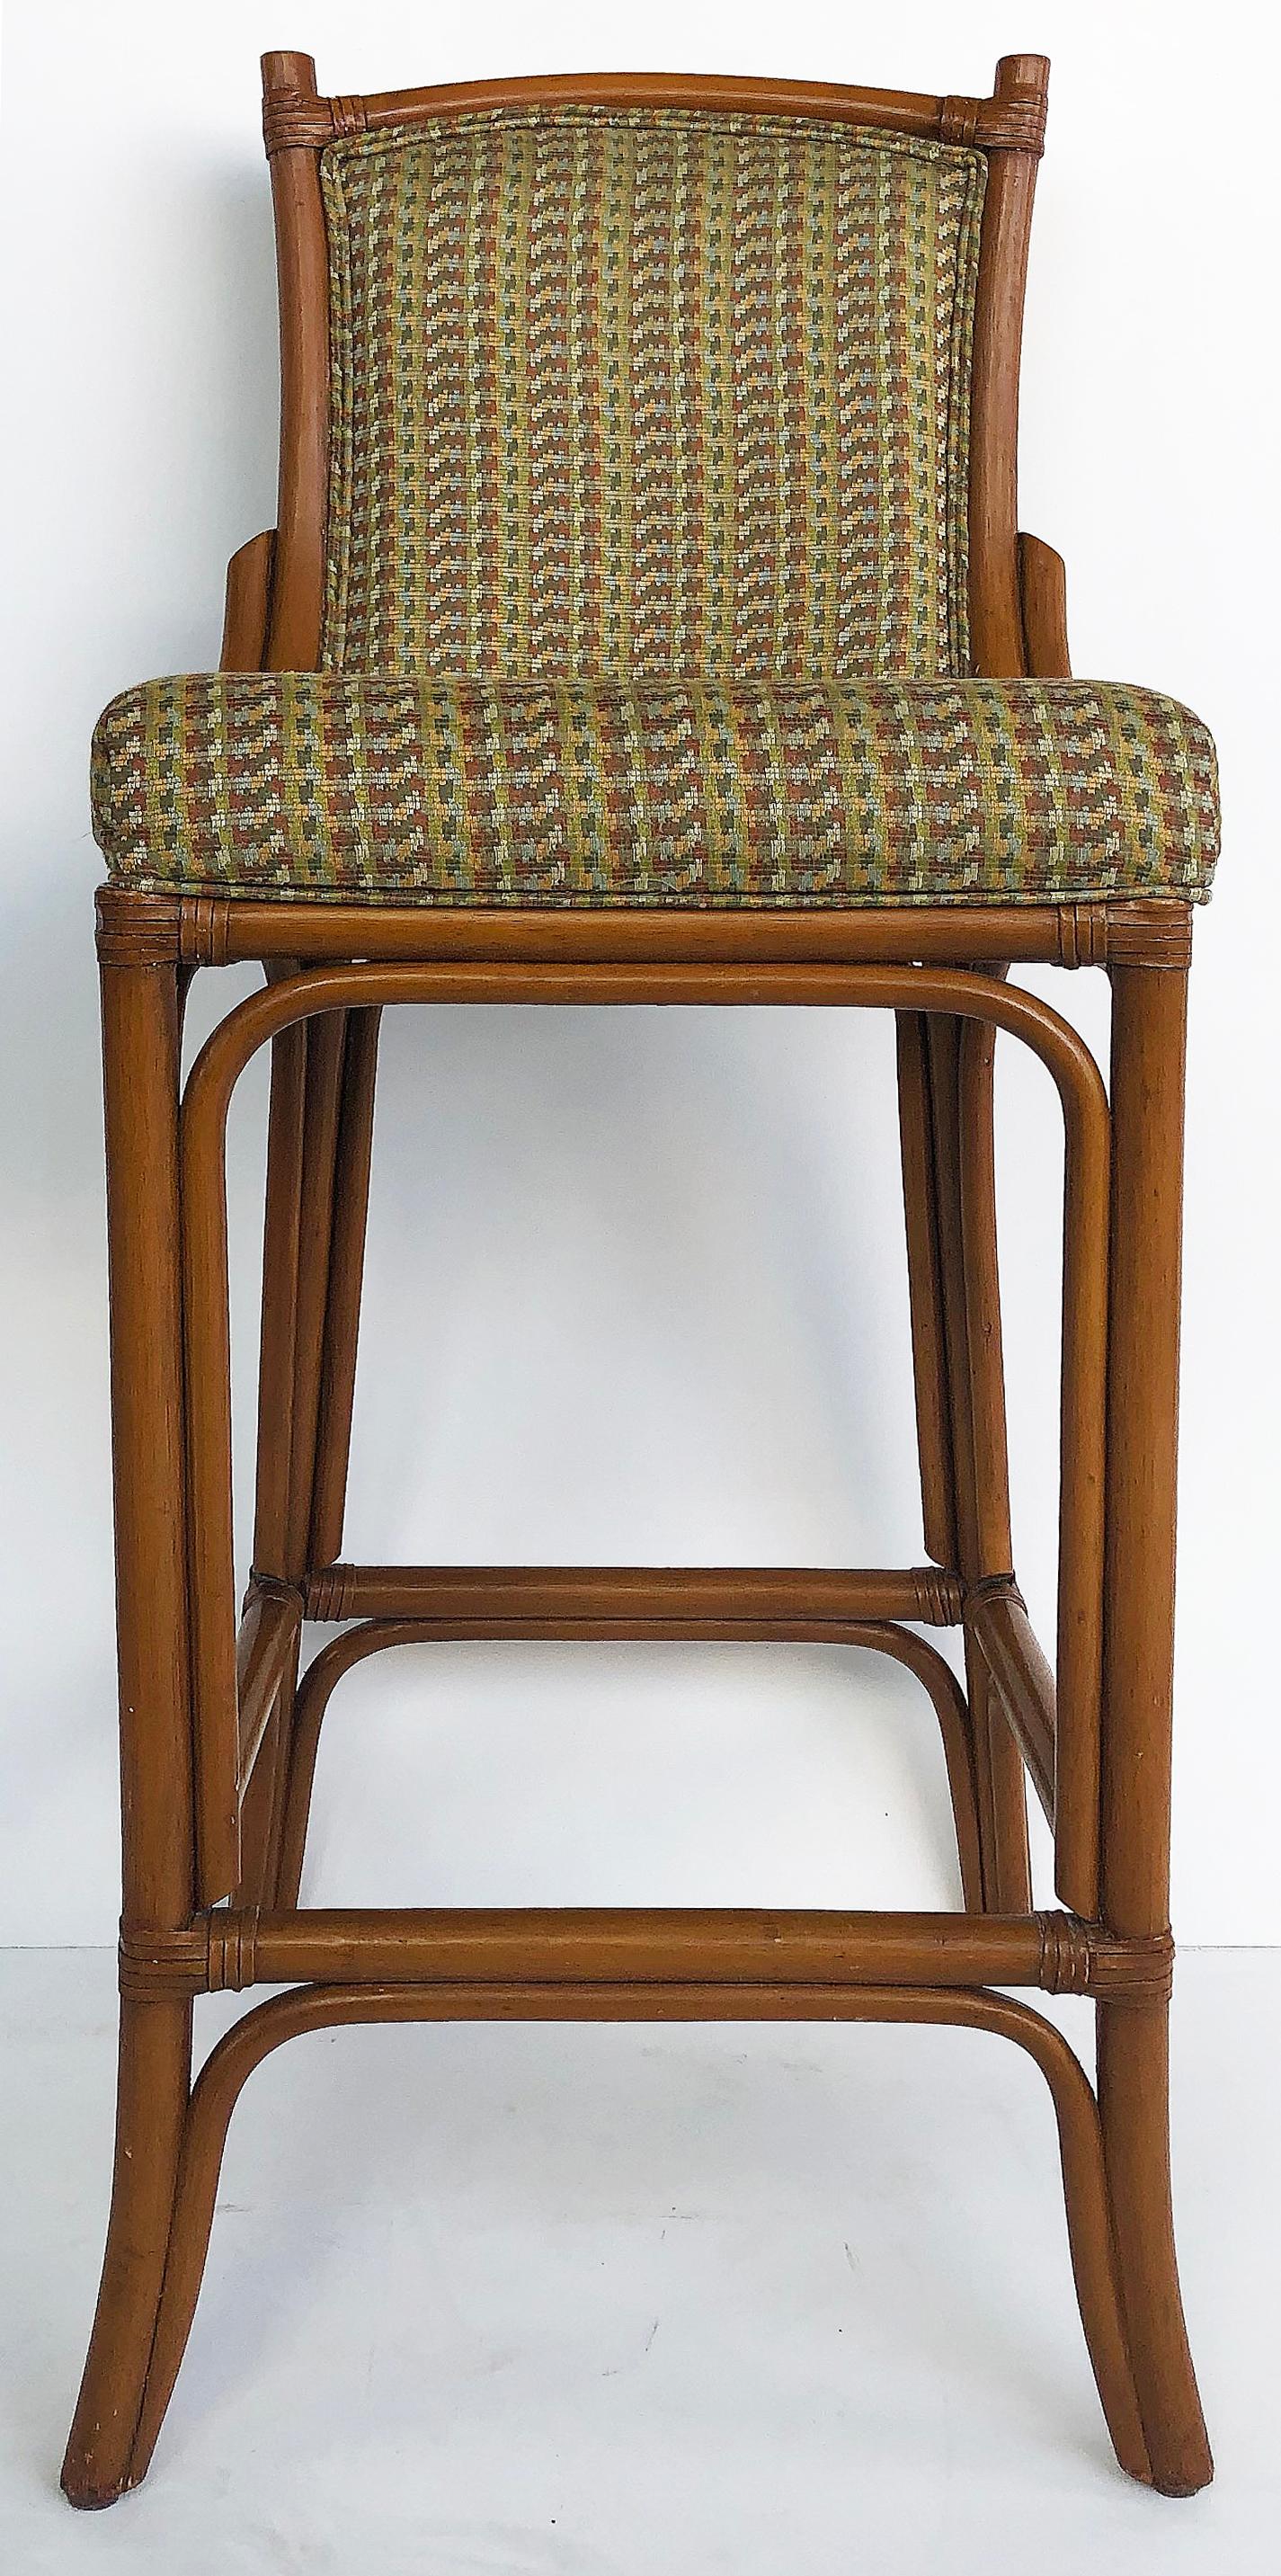 Rattan Look Bar Stools with Leather Wrapping John McGuire Attributed, Pair

Offered by the pair are wood rattan look bar stools with leather straps attributed to McGuire of San Francisco. These stools are being sold as pairs with 4 pairs available